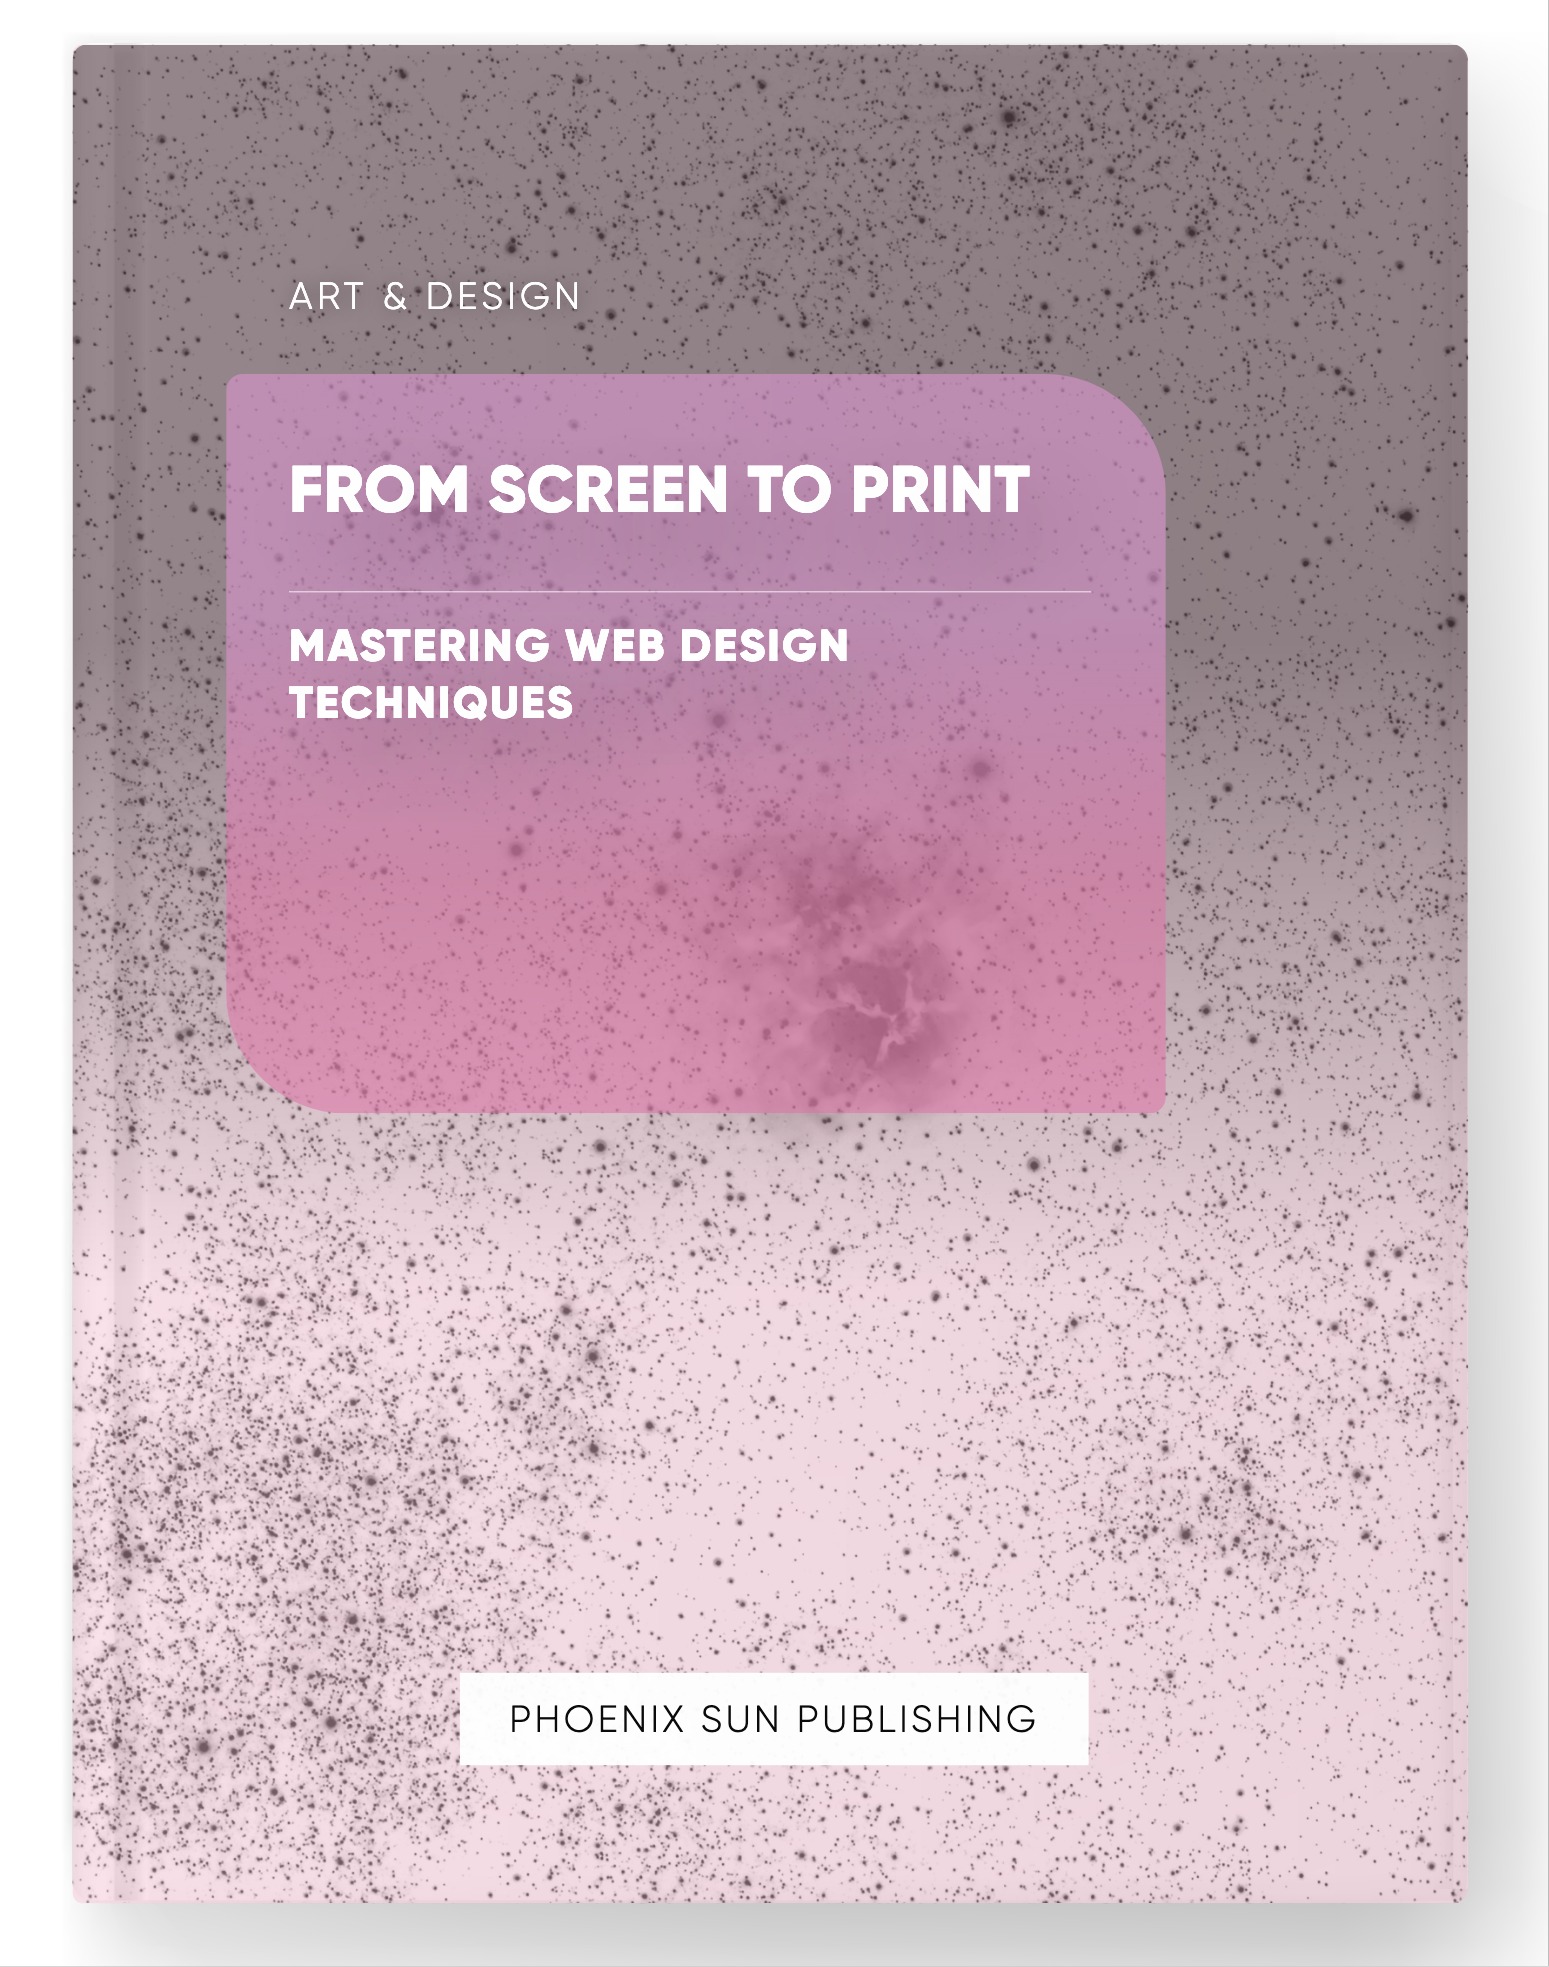 From Screen to Print – Mastering Web Design Techniques